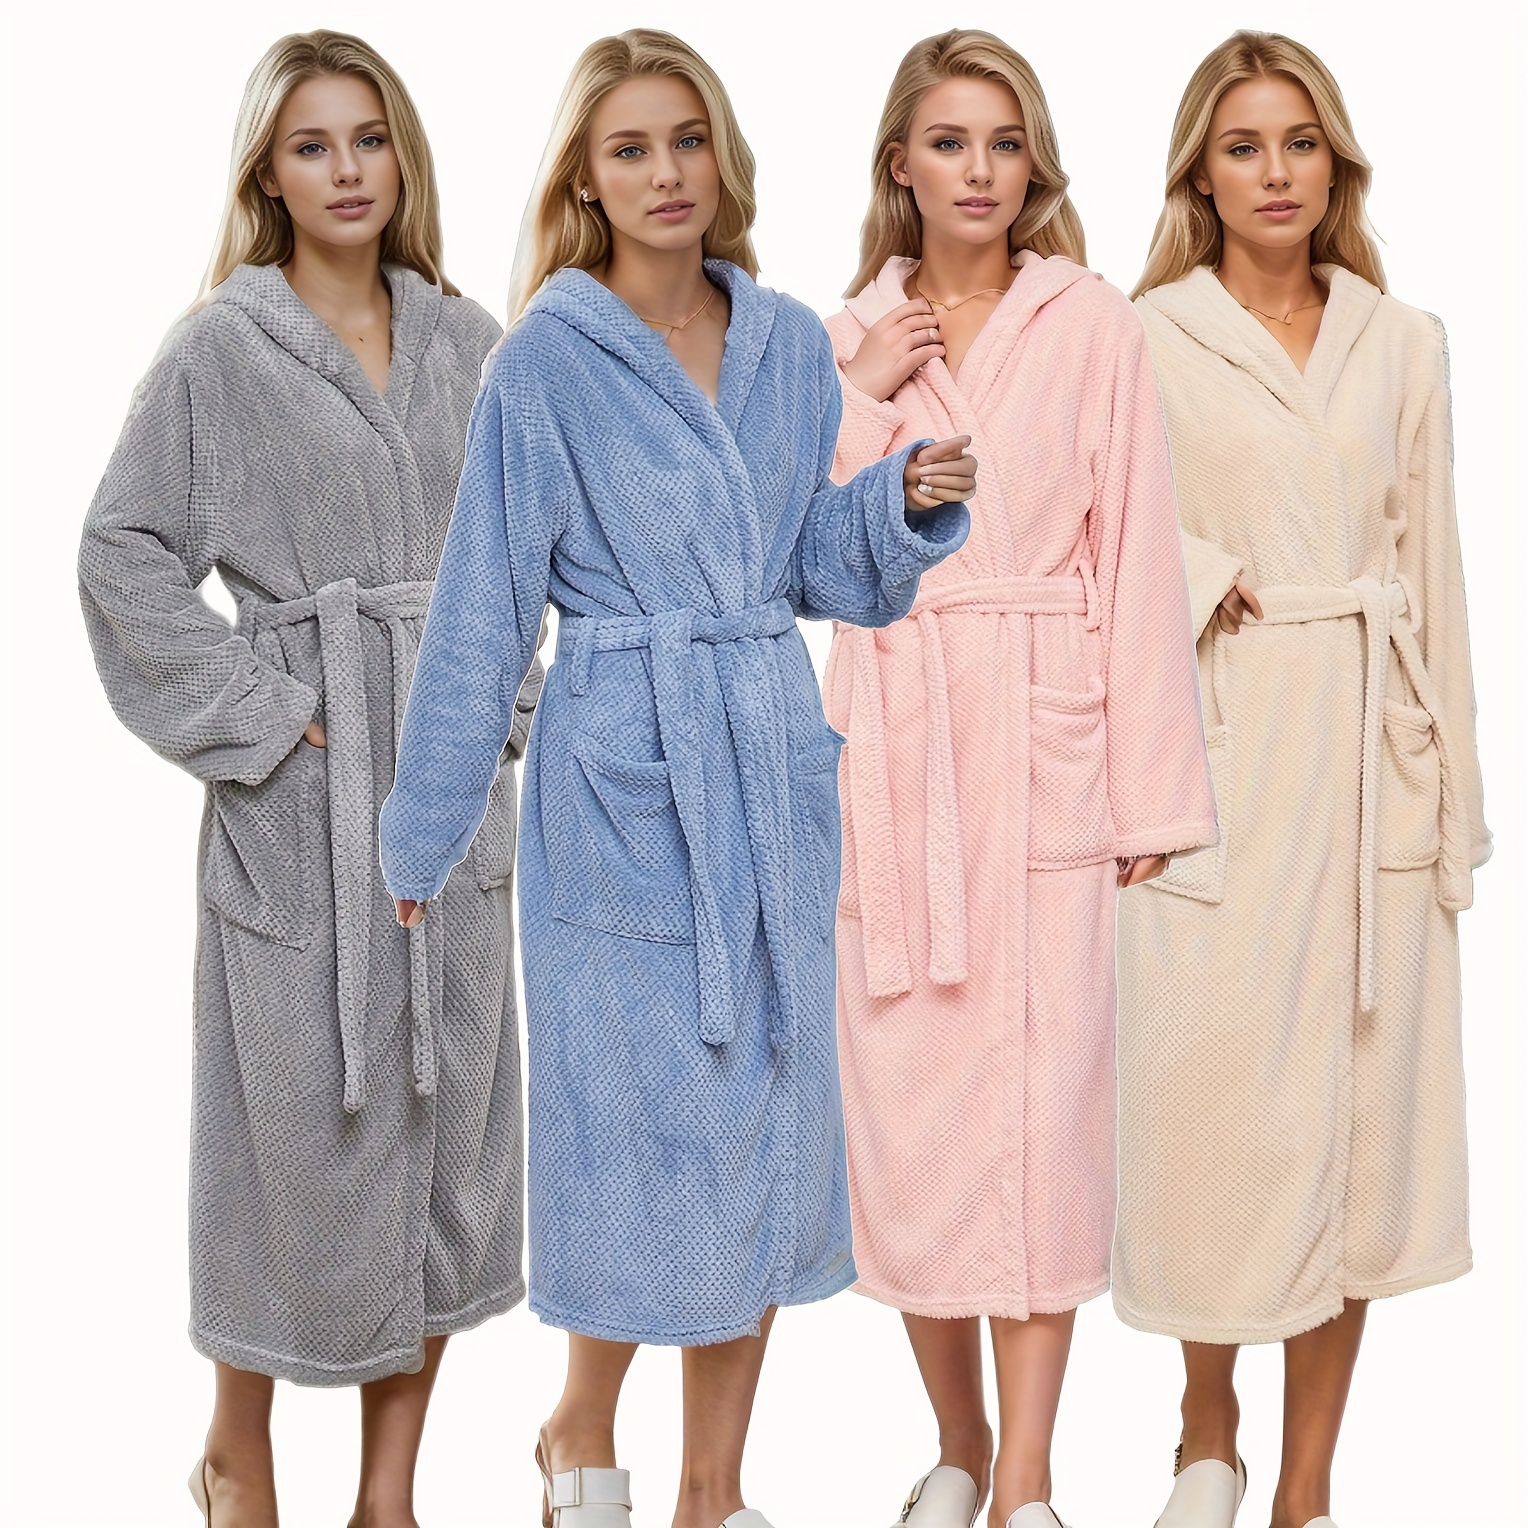 

Ultra-absorbent Women's Hooded Bathrobe With Pocket - Long Sleeve, Plaid Design For Shower & Spa, Includes Large Bath Towel And Skirt Bath Accessories Bath Rugs For Bathroom